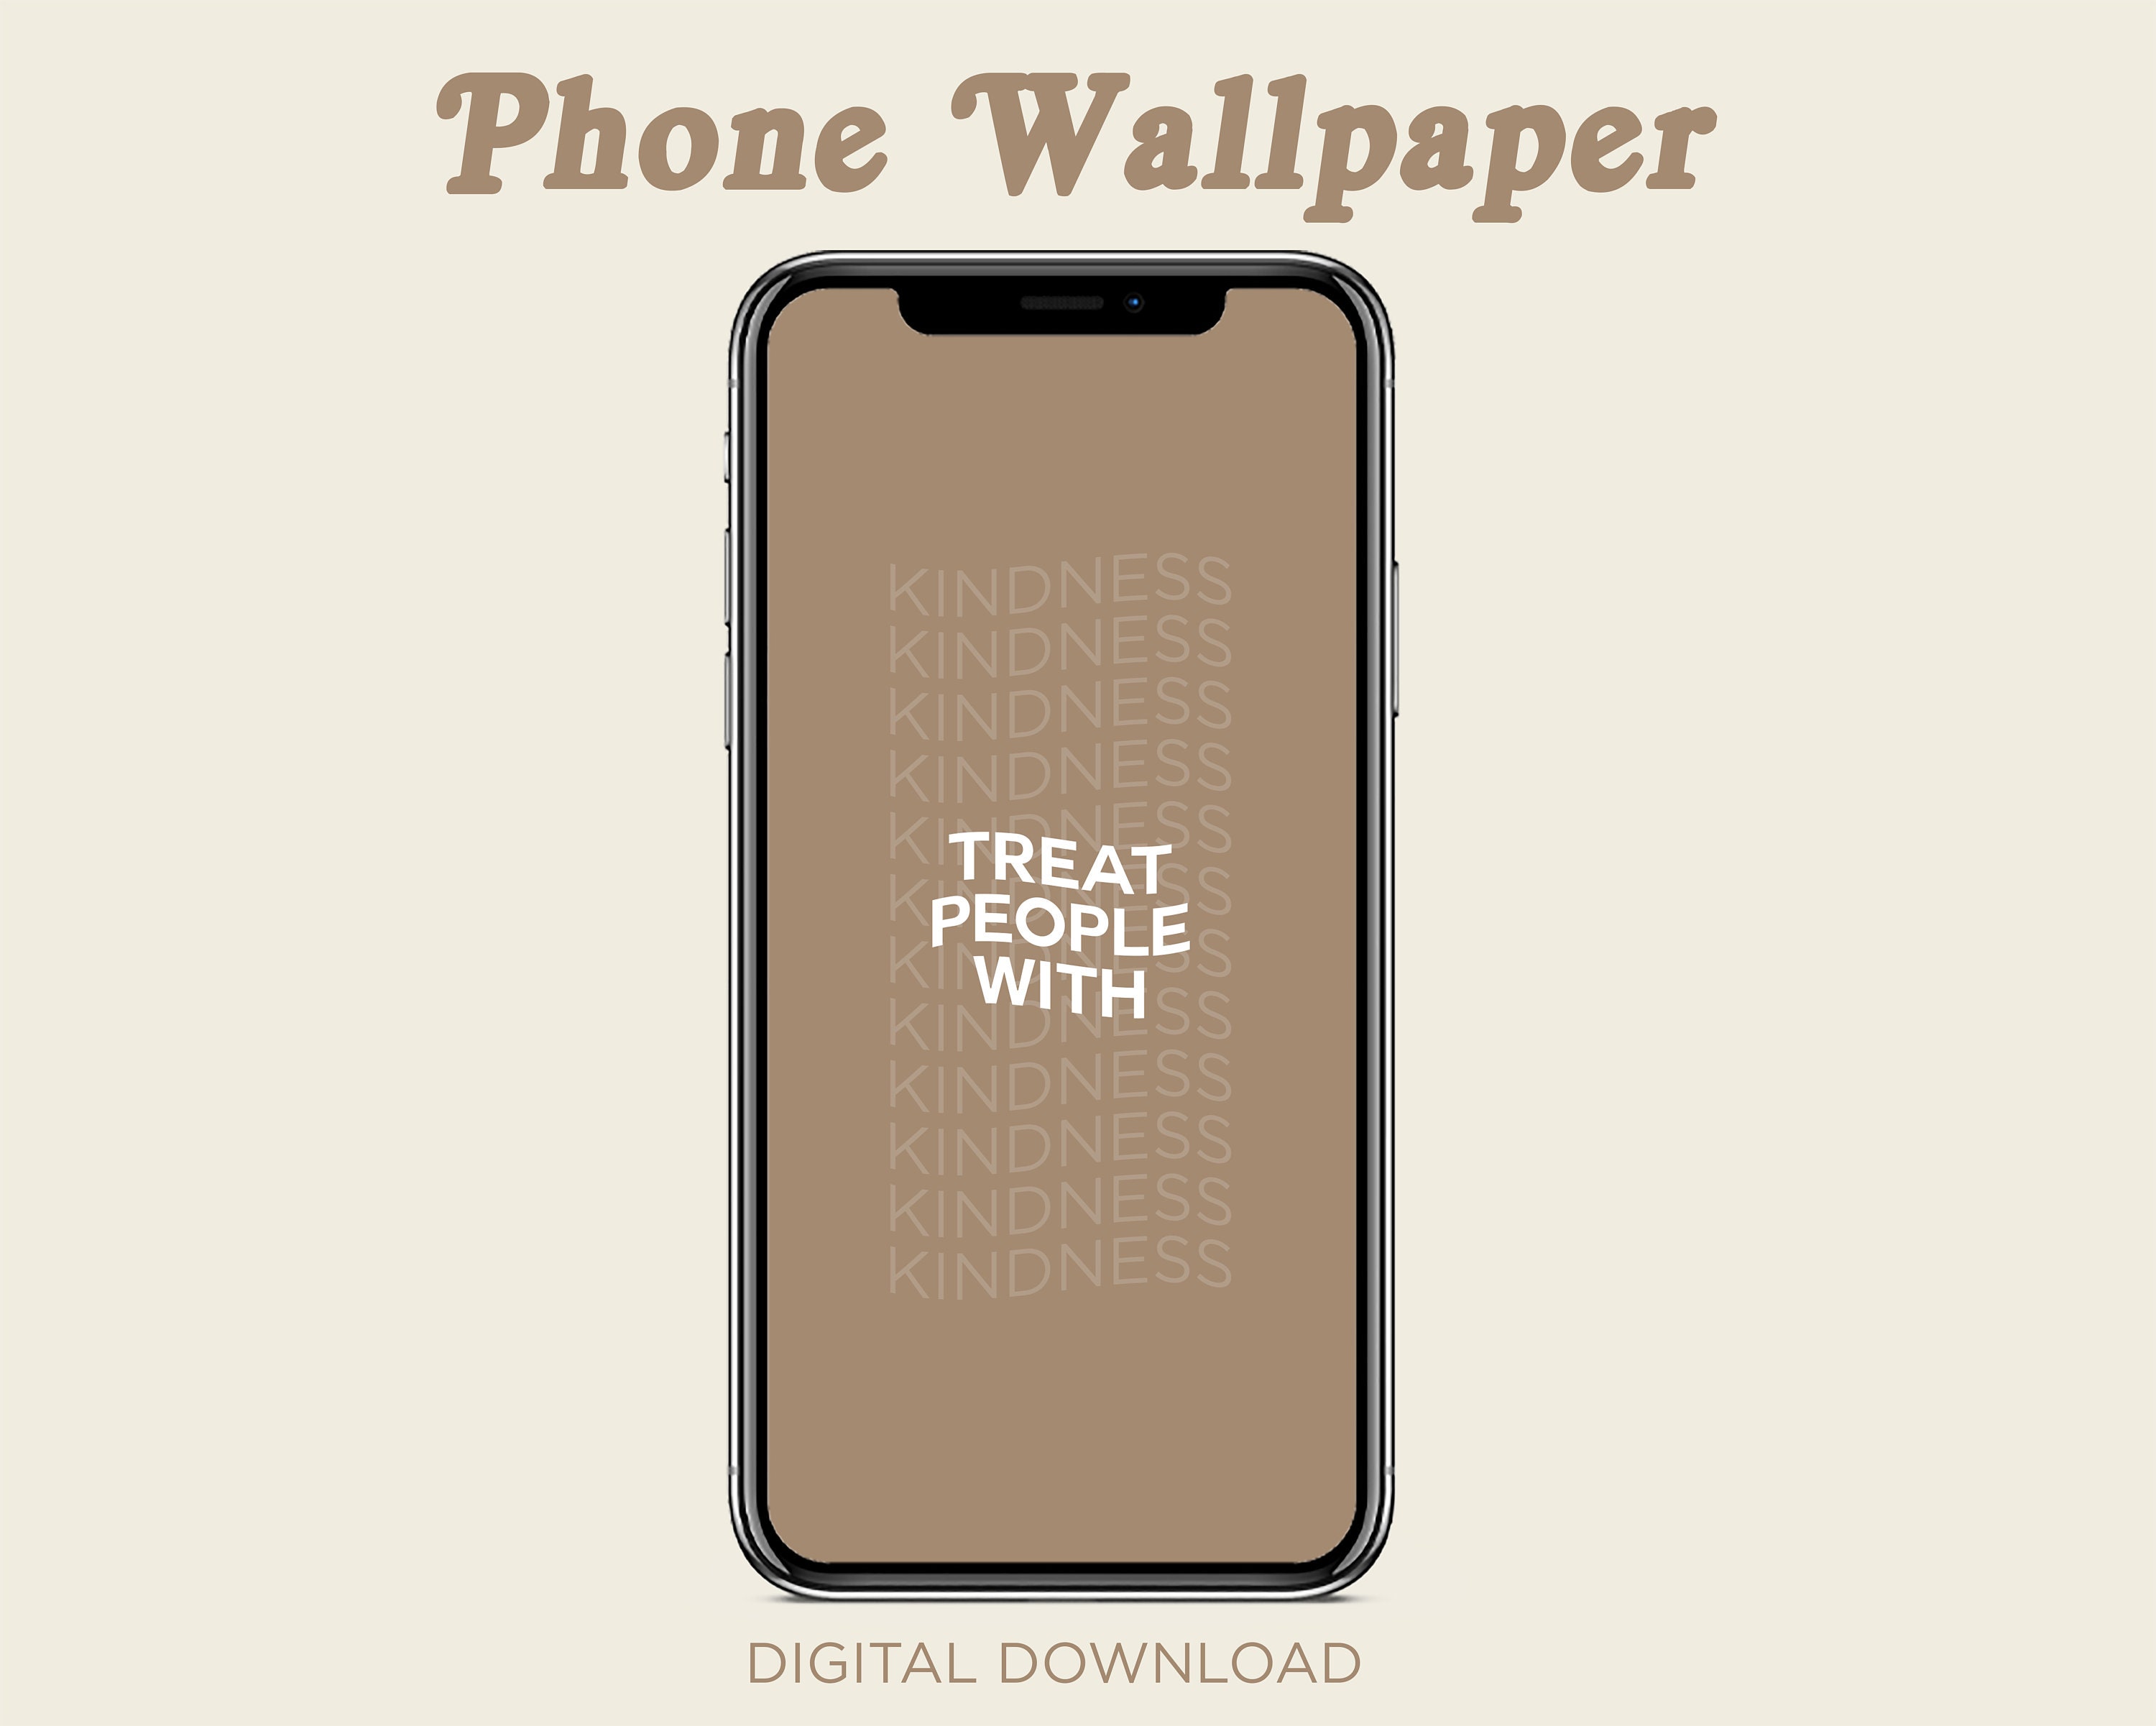 treat people with kindness by Martina Menini on Dribbble